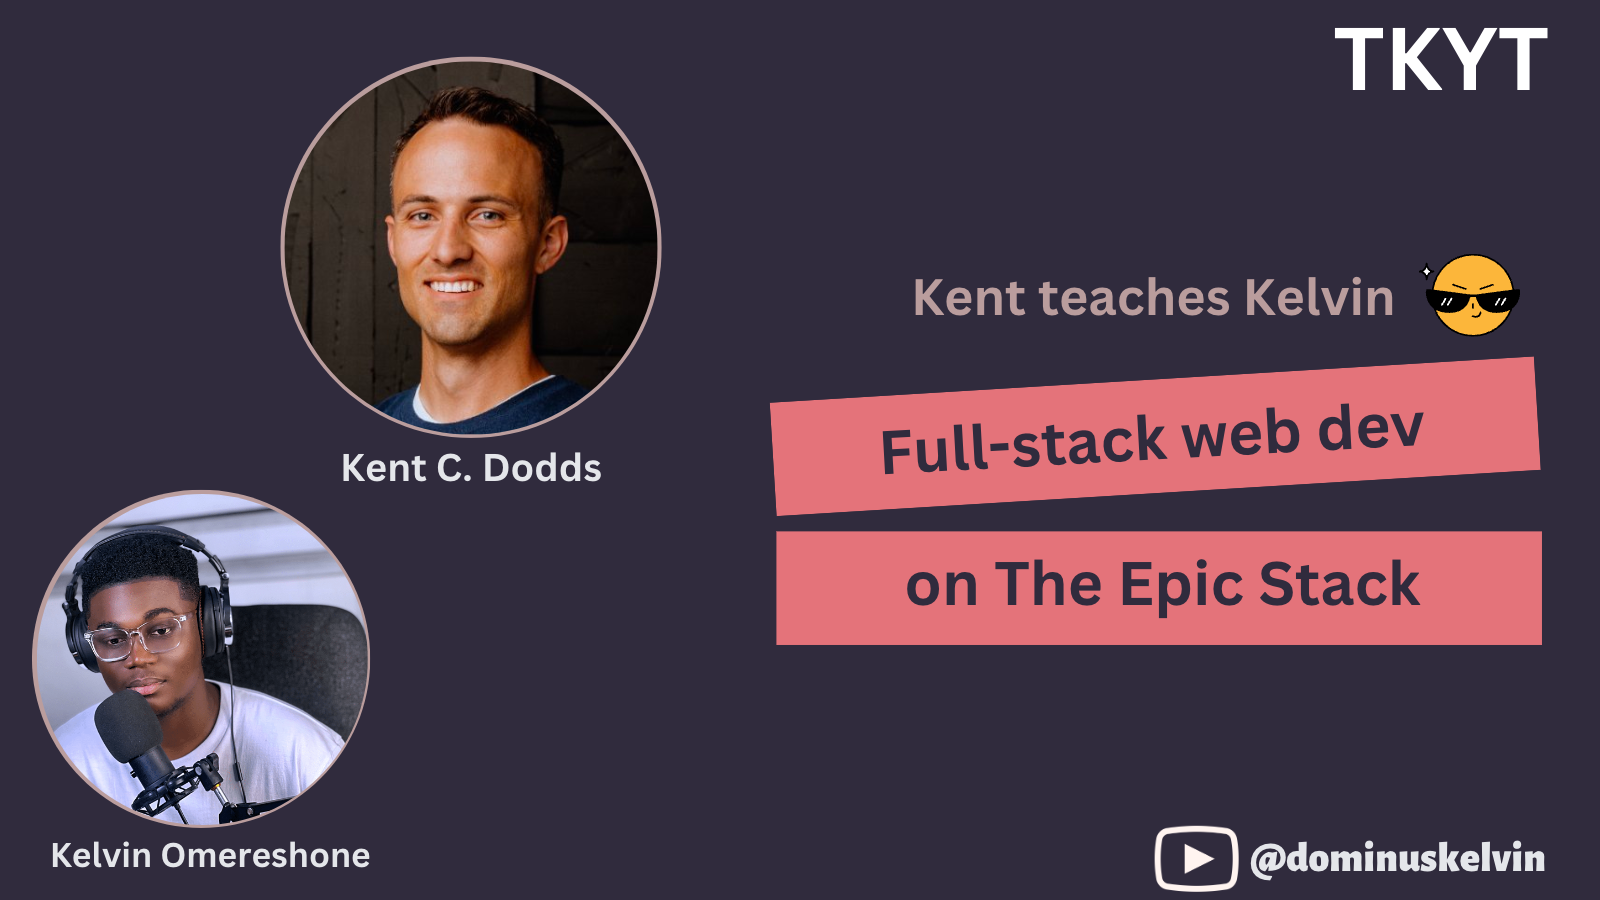 Full-stack web dev on The Epic Stack